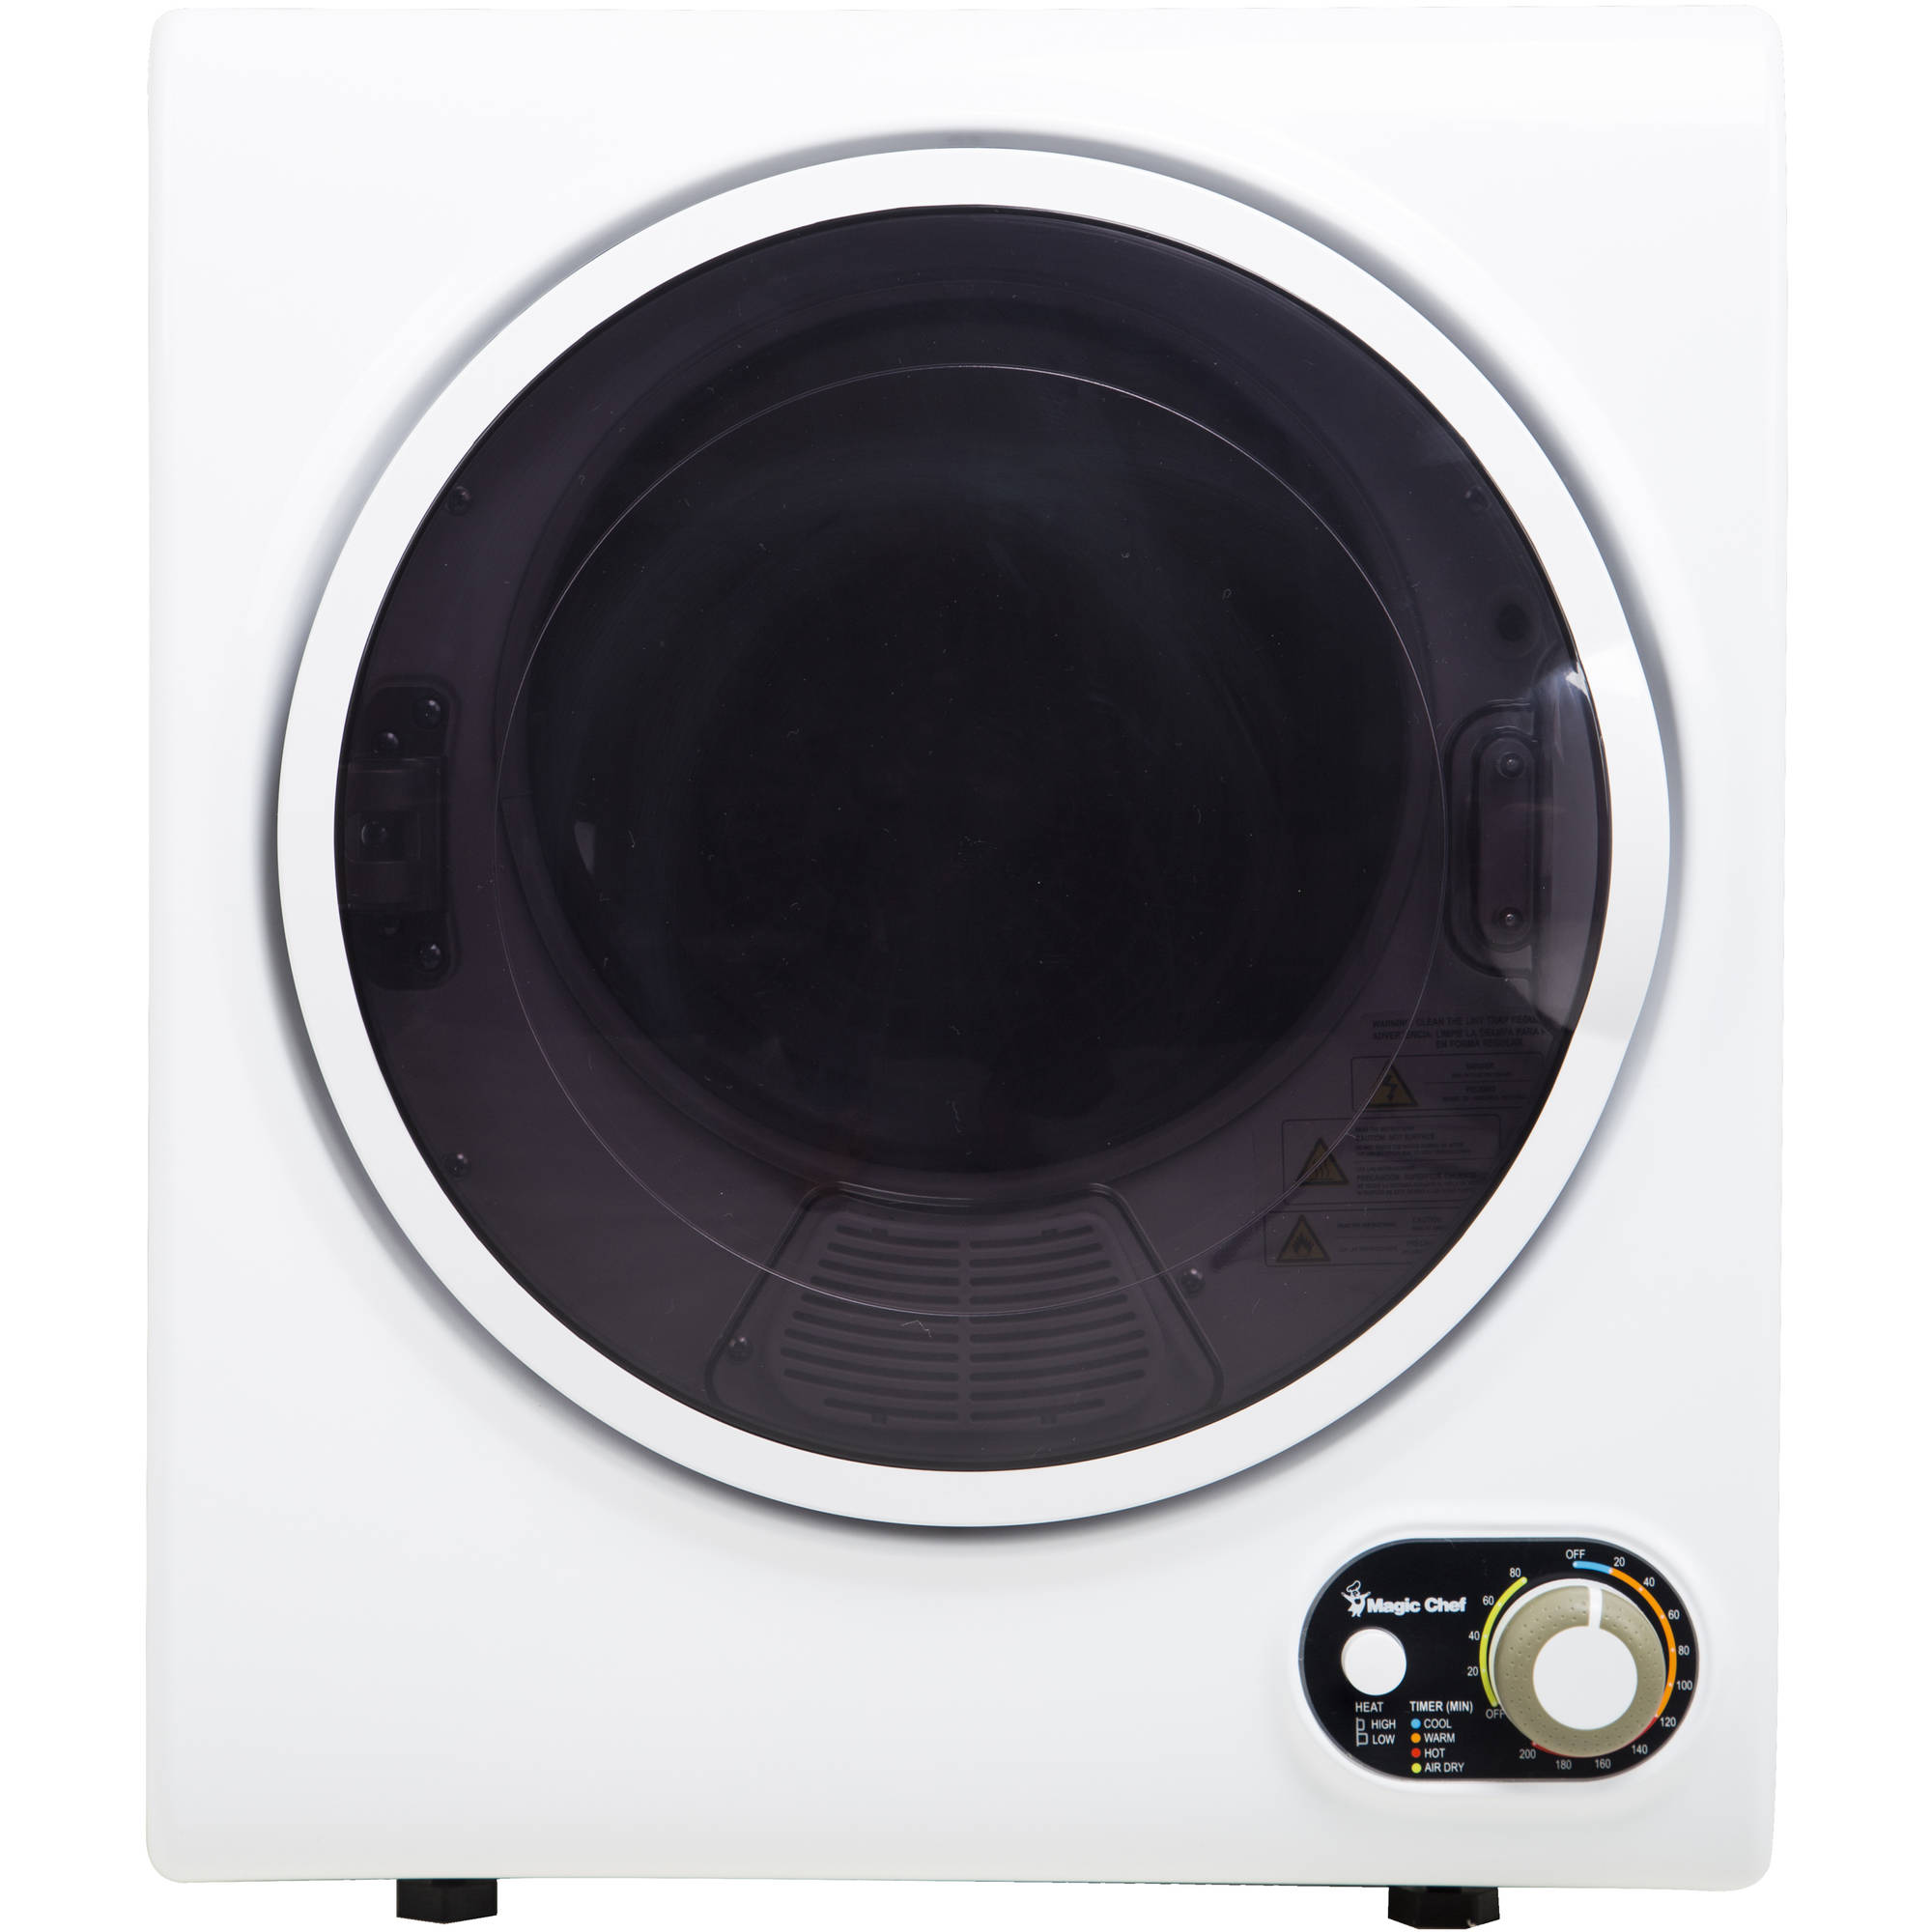 Magic Chef 1.5 Cu. ft. Compact Electric Dryer, White, 19.5 in L x 23.8 in H x 16.1 in D - image 1 of 5